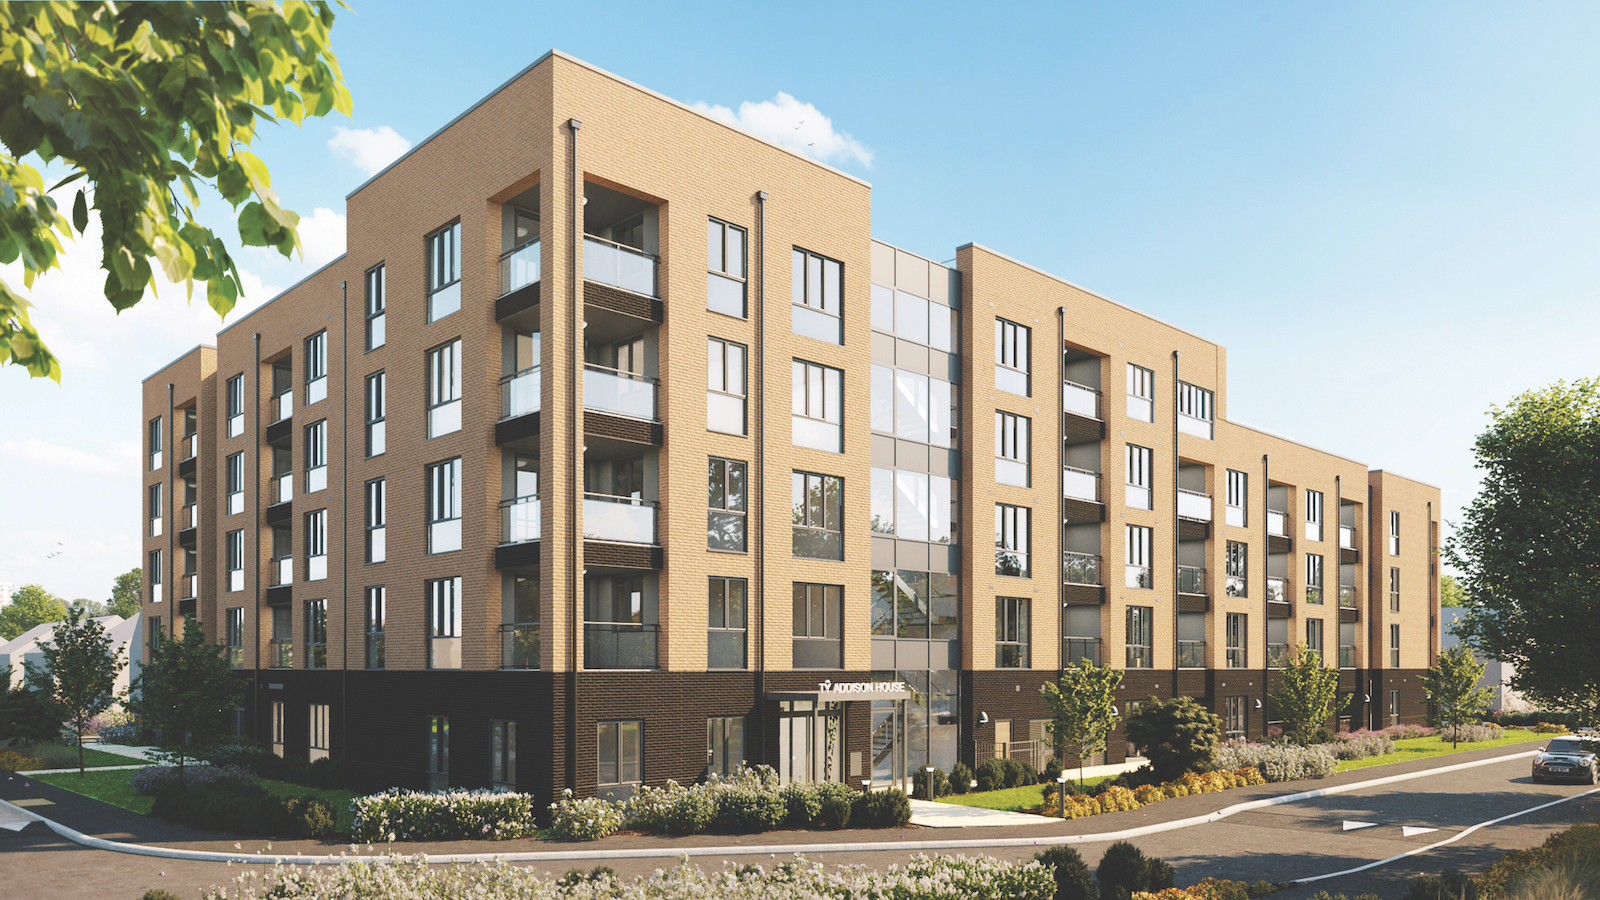 Eastern High includes a 44-apartment Community Living scheme for older people